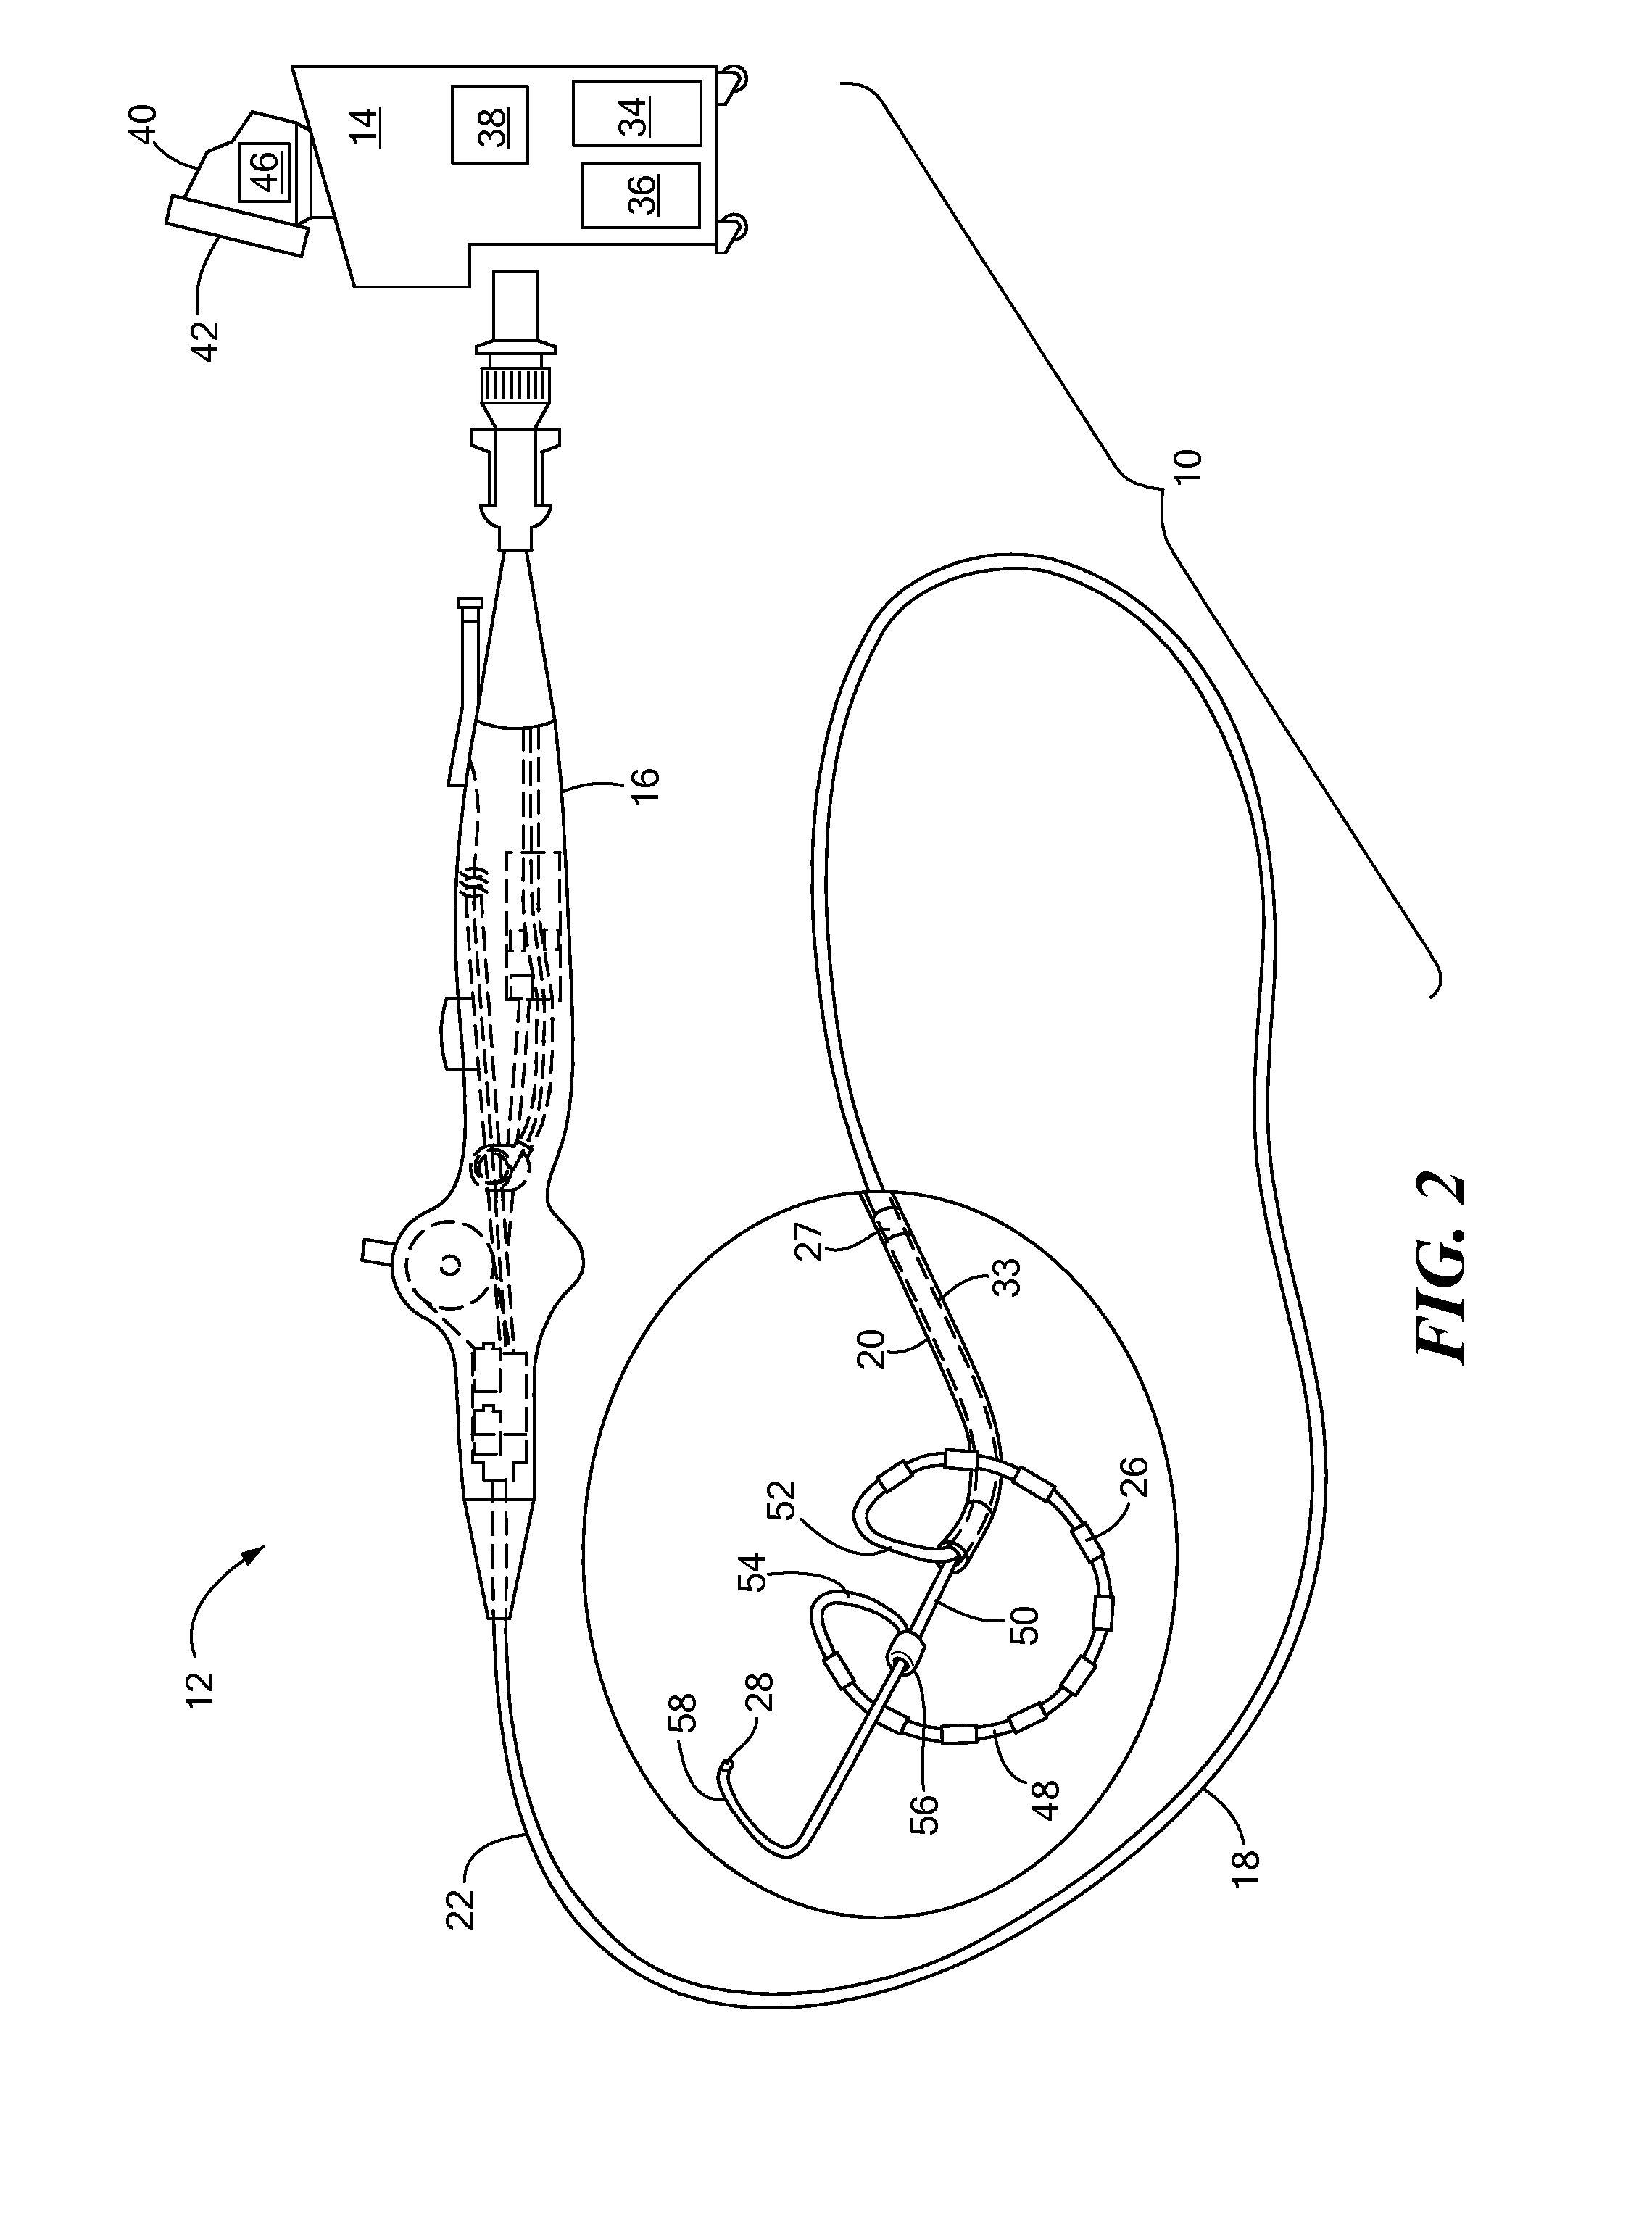 Method and apparatus for using phonomyography to prevent nerve damage during a medical procedure